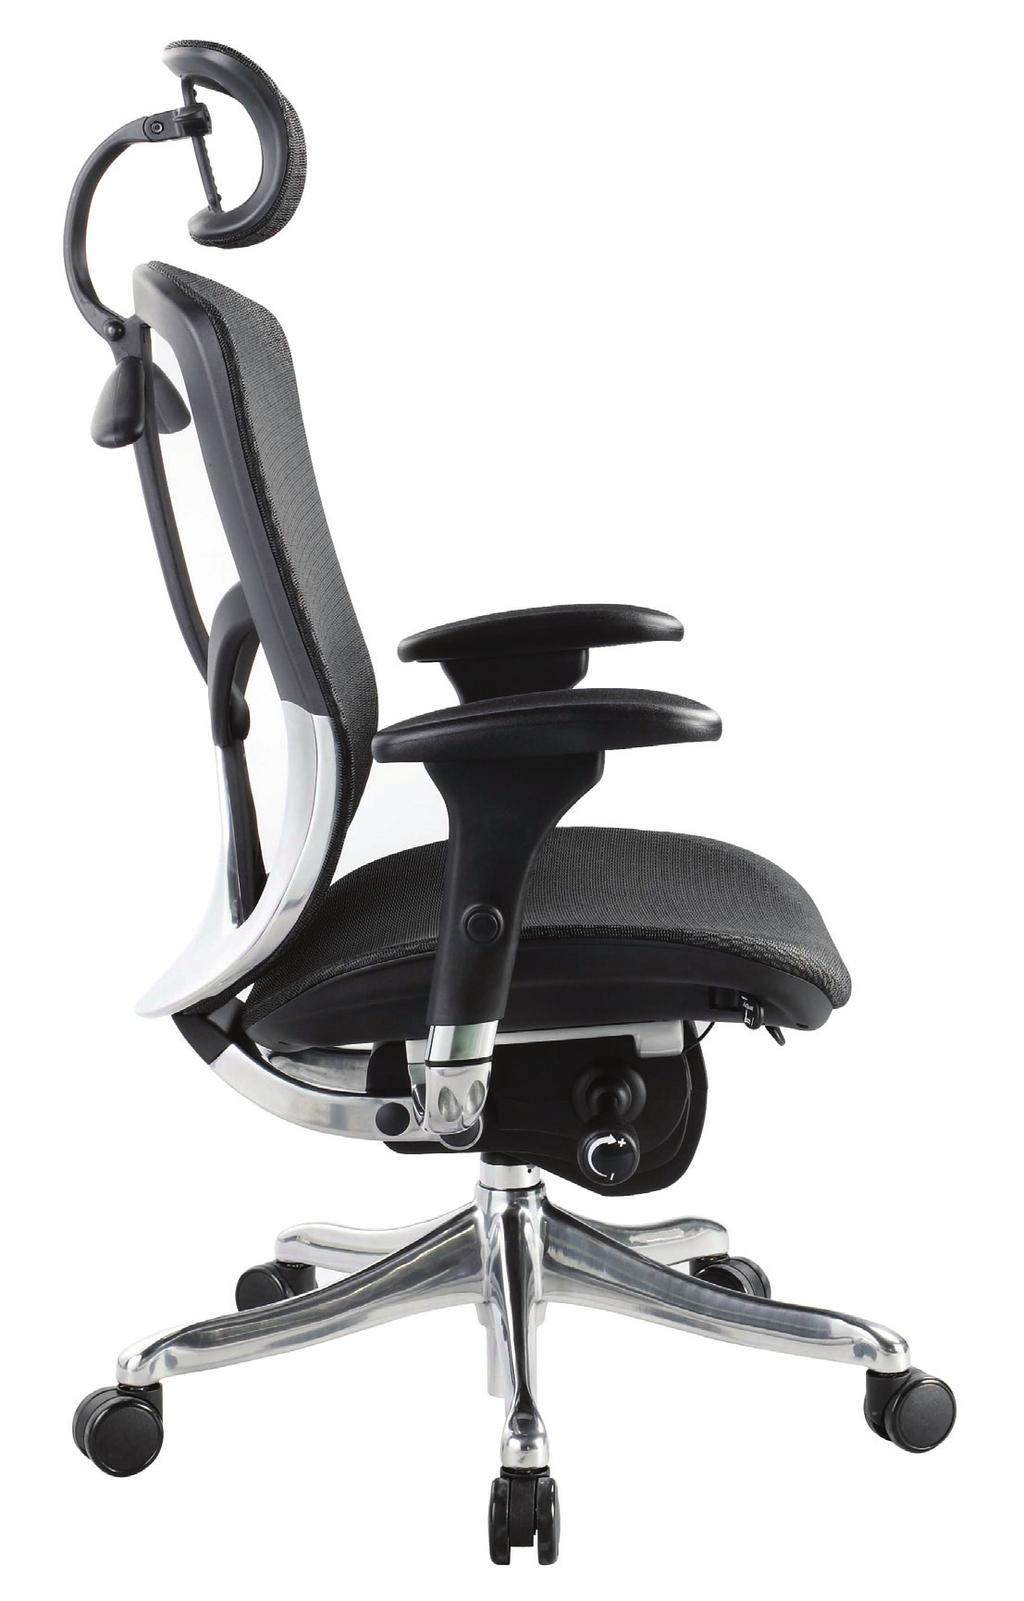 CONSIDERATION #1: Ergonomics Ergonomics typically play a central role in office chair purchase decisions, and that s a good thing.